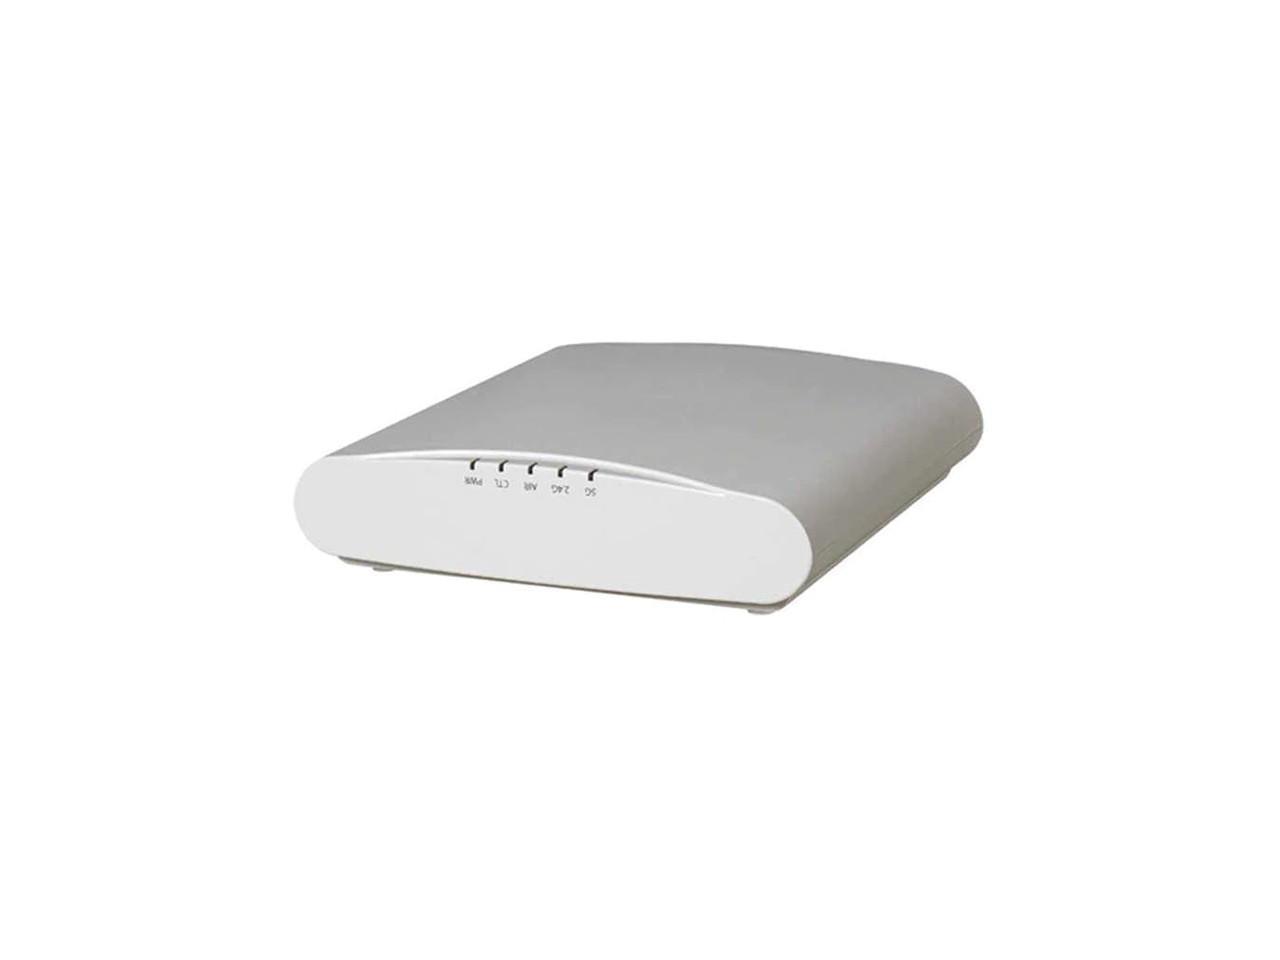 Ruckus ZoneFlex R510 901-R510-WW00 - 2.4GHz and 5GHz dual carrier frequency, 2 Ethernet ports indoor wireless access point 9SIAX4NFFT2054